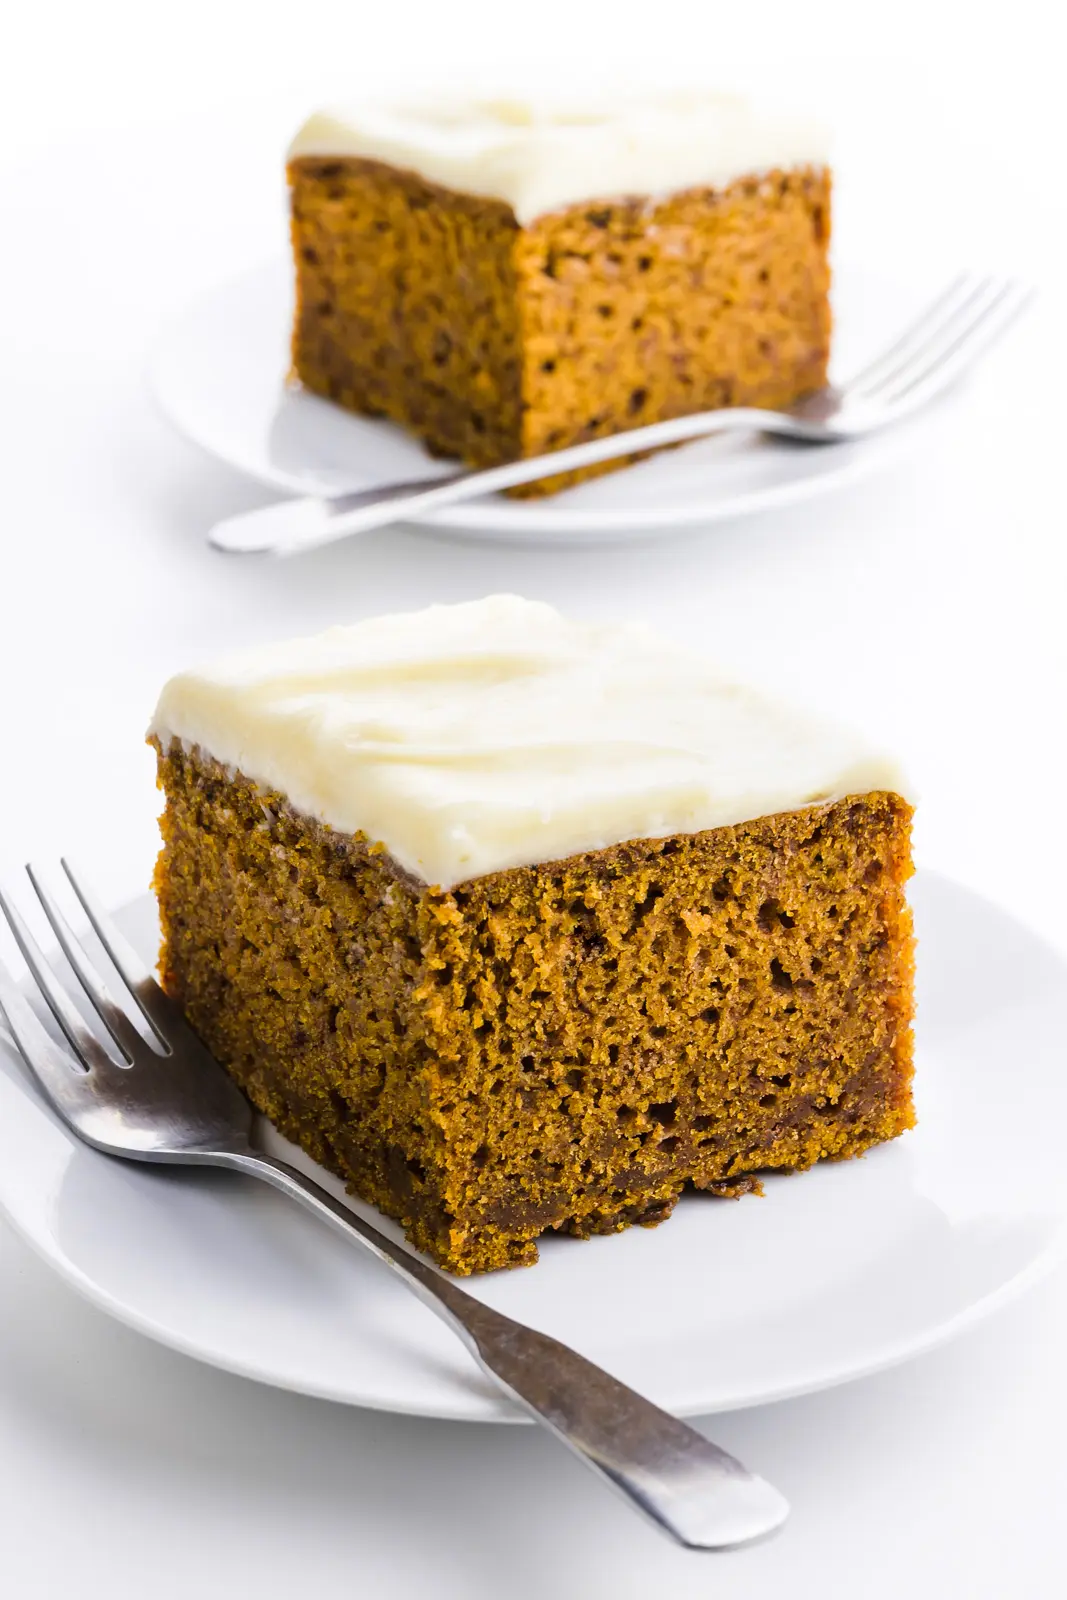 Two slices of pumpkin cake , one in front of the other, with forks beside each slice.